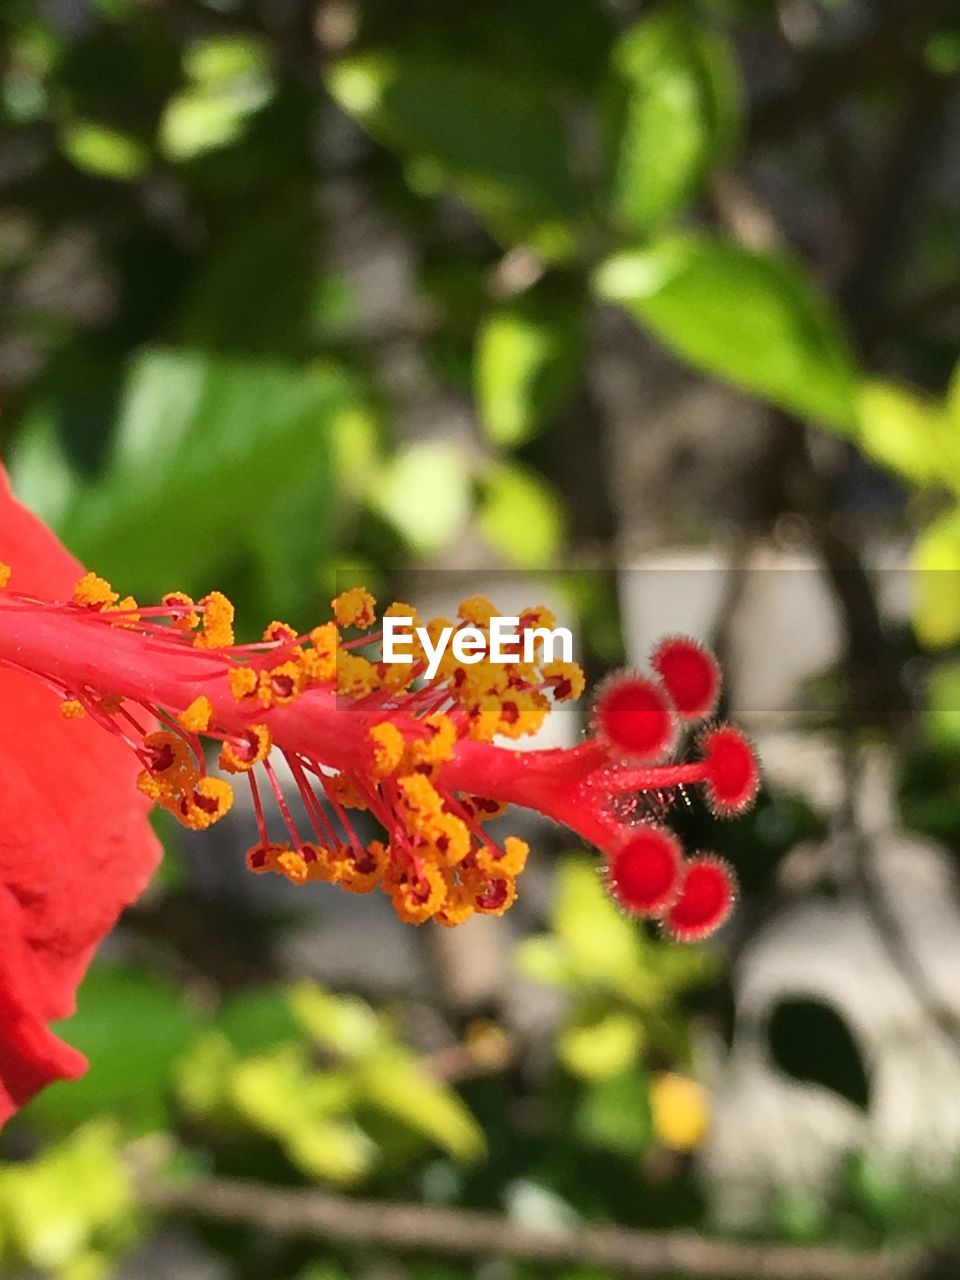 CLOSE-UP OF RED FLOWERING PLANT GROWING ON TREE